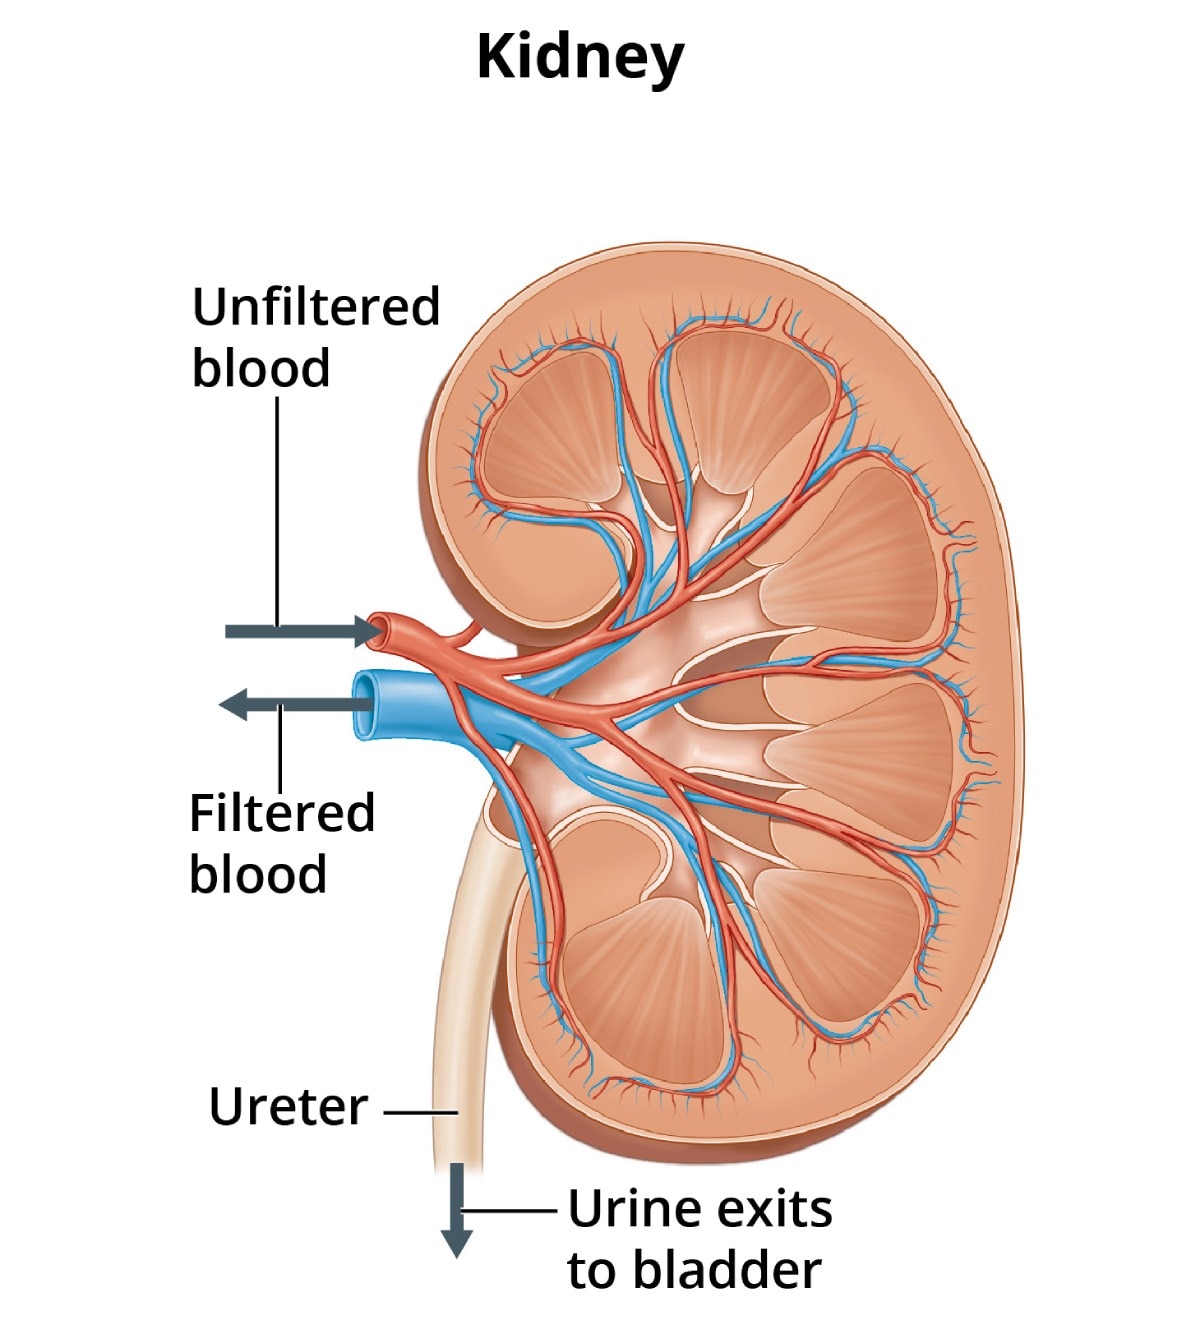 A human kidney, with arrows showing where unfiltered blood enters the kidney and filtered blood leaves the kidney. Wastes and extra water leave the kidney through the ureter to the bladder as urine.